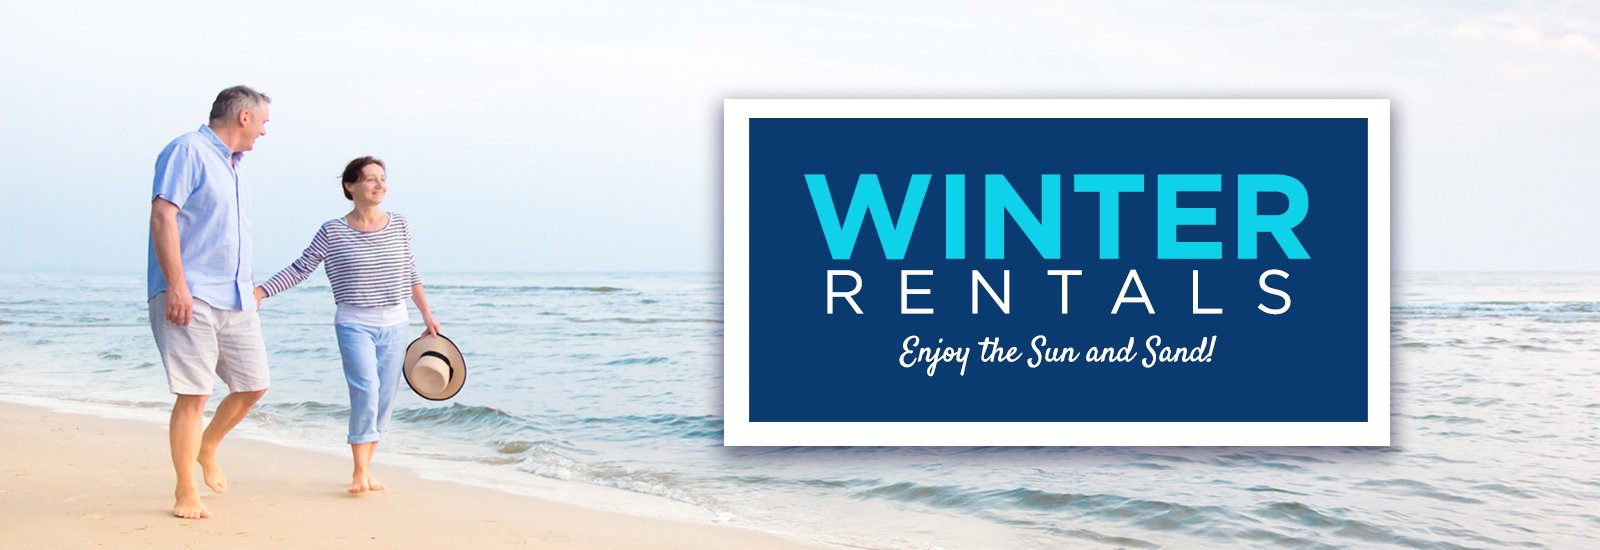 Winter Rentals at The Strand